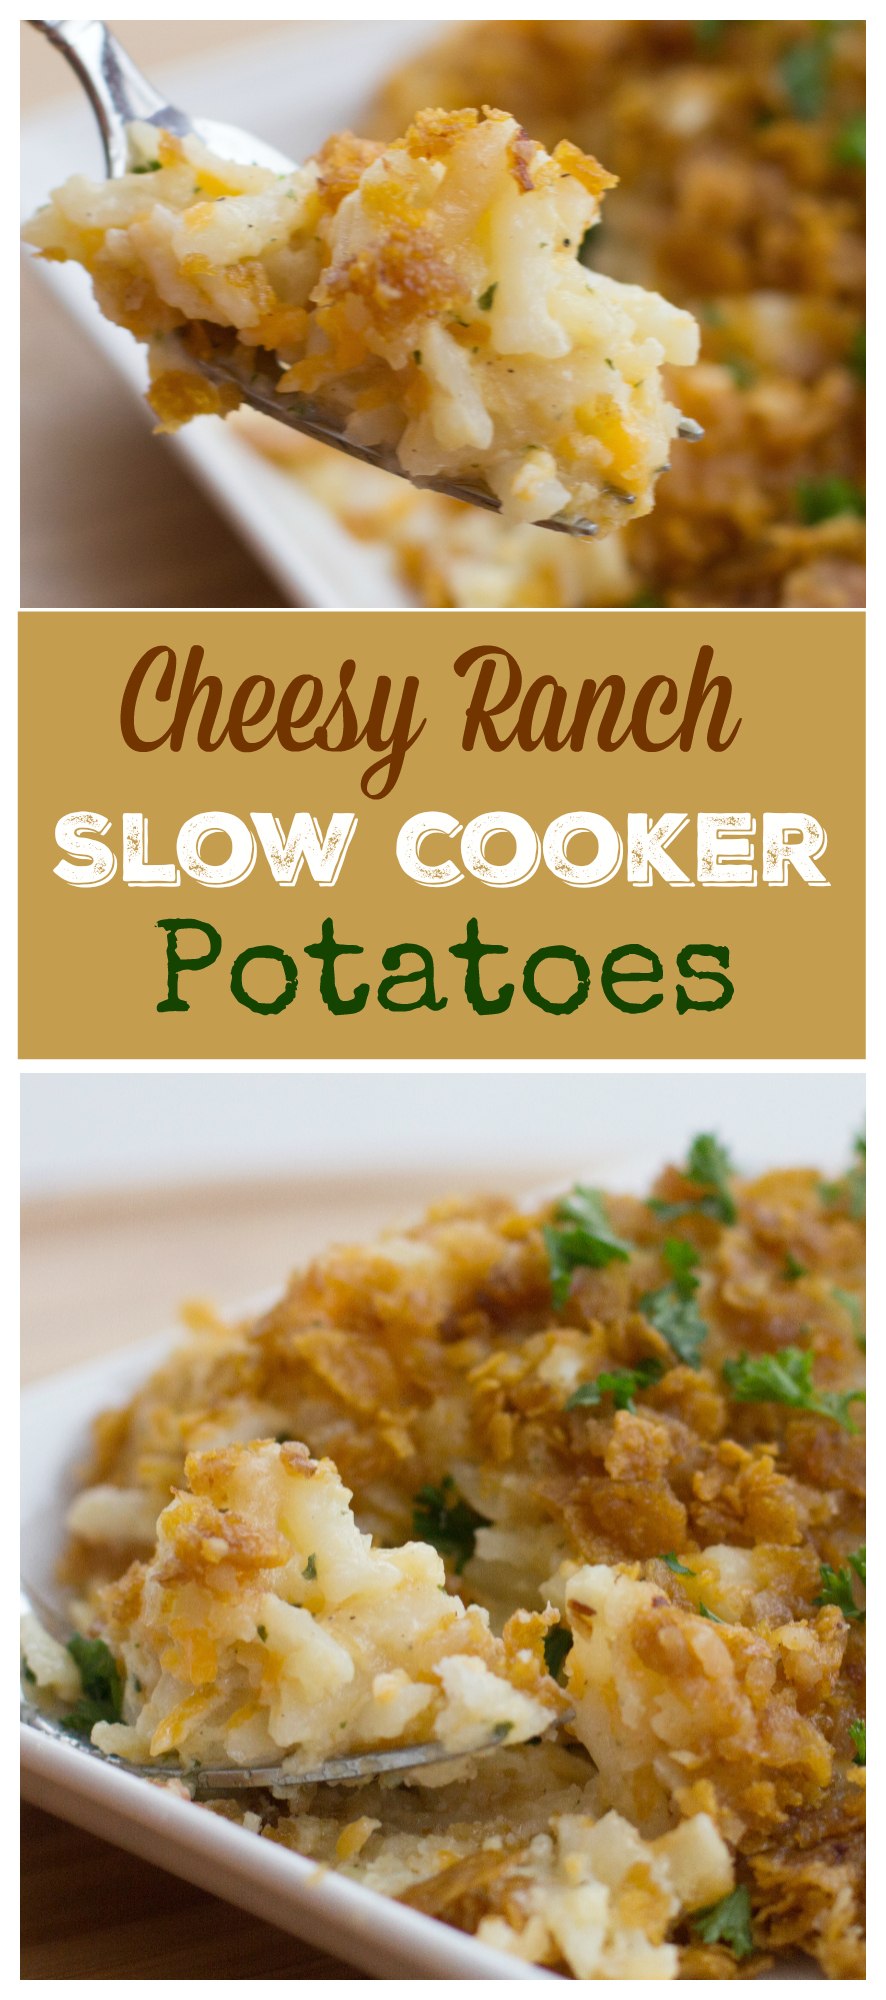 Slow Cooker Cheesy Ranch Potatoes - Sugar n' Spice Gals